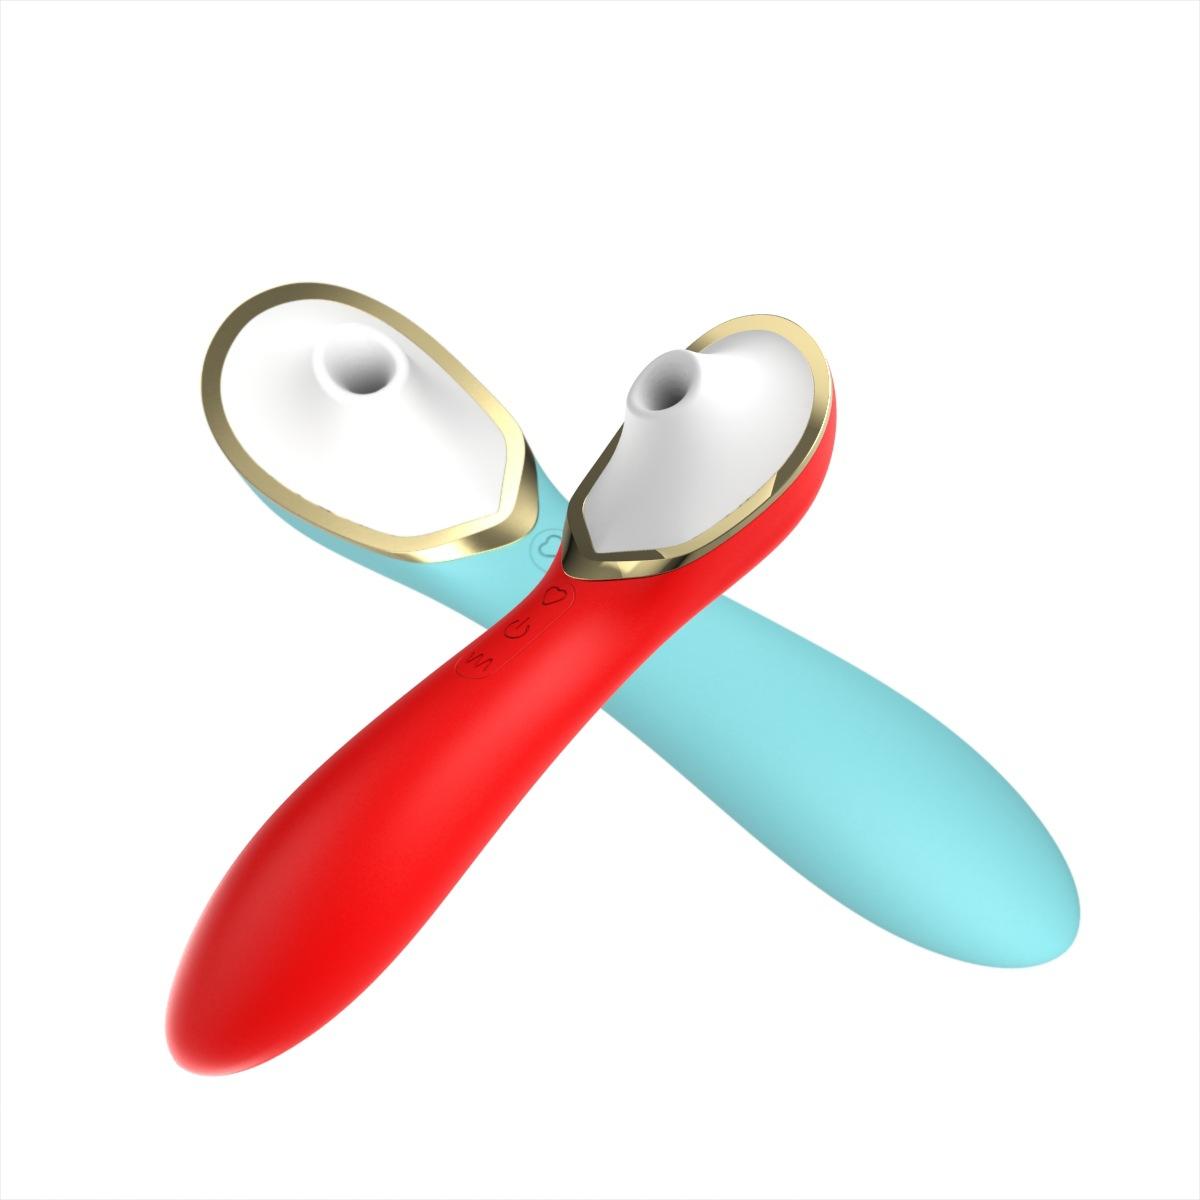 Orissi new magnetic suction charging suction vibrating massage stick for women, multi-functional and insertable